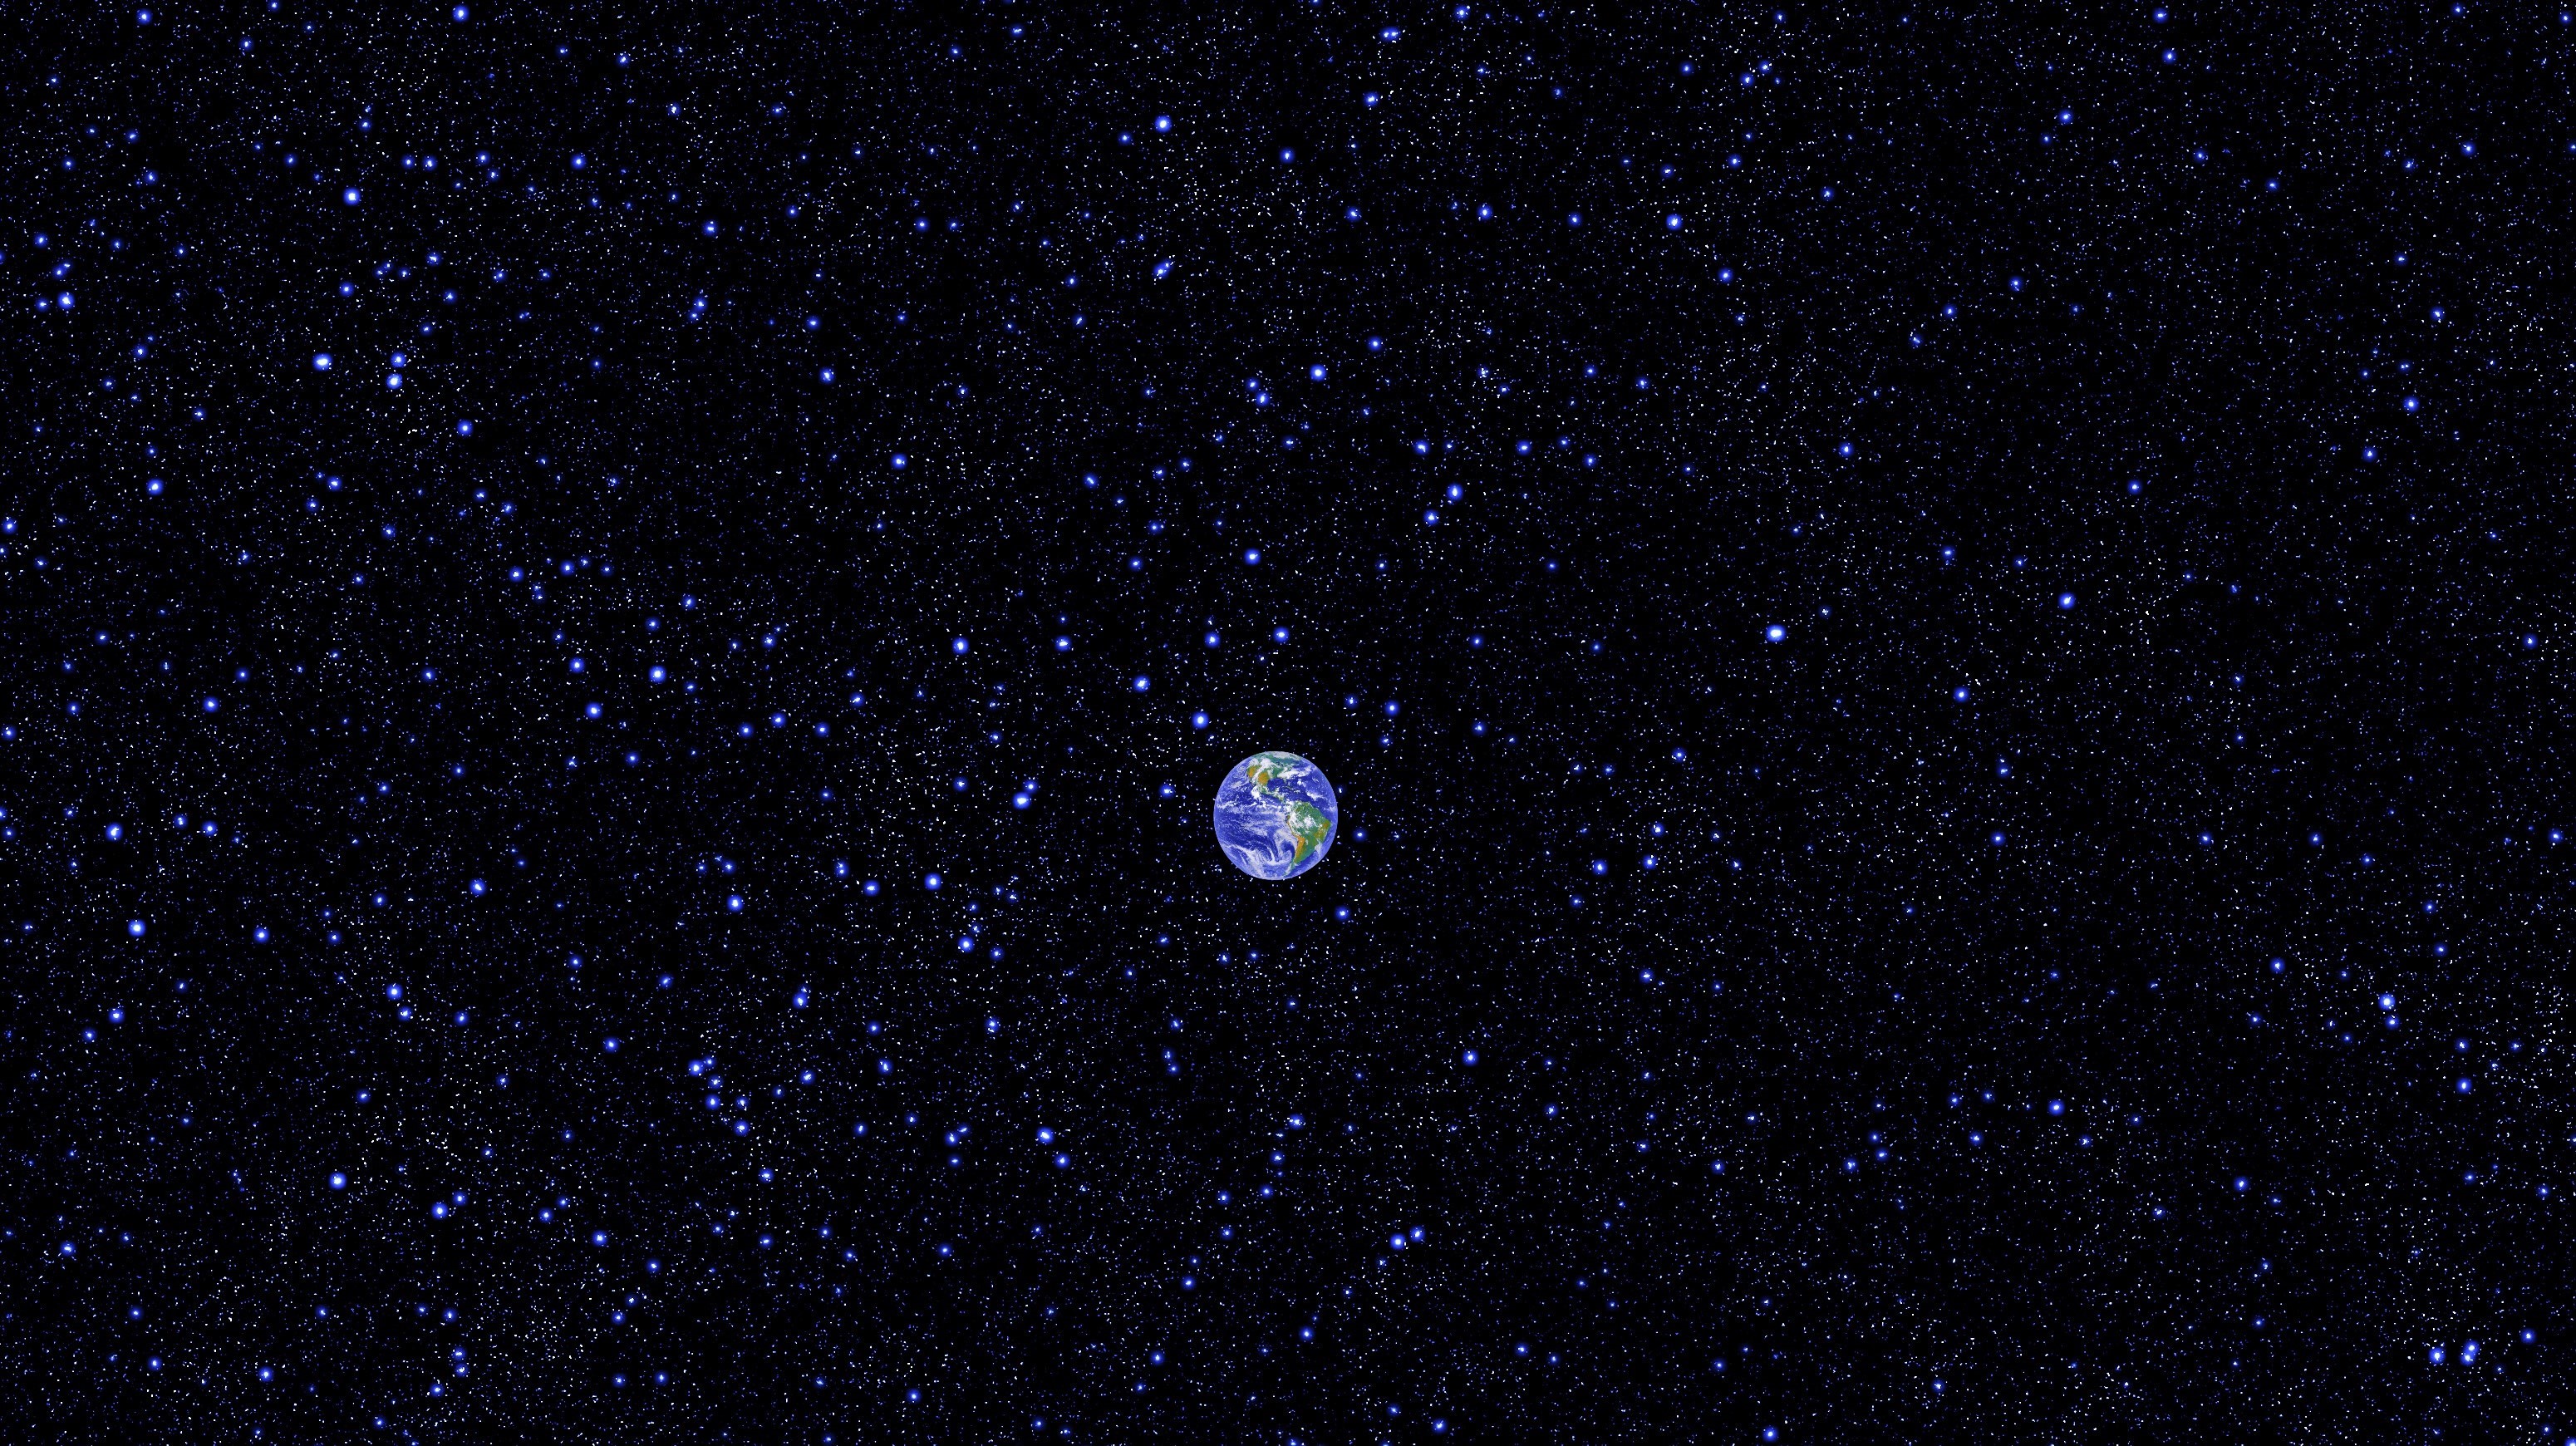 bright image of Earth in the center of a dark blue space dotted with many white and light blueish stars